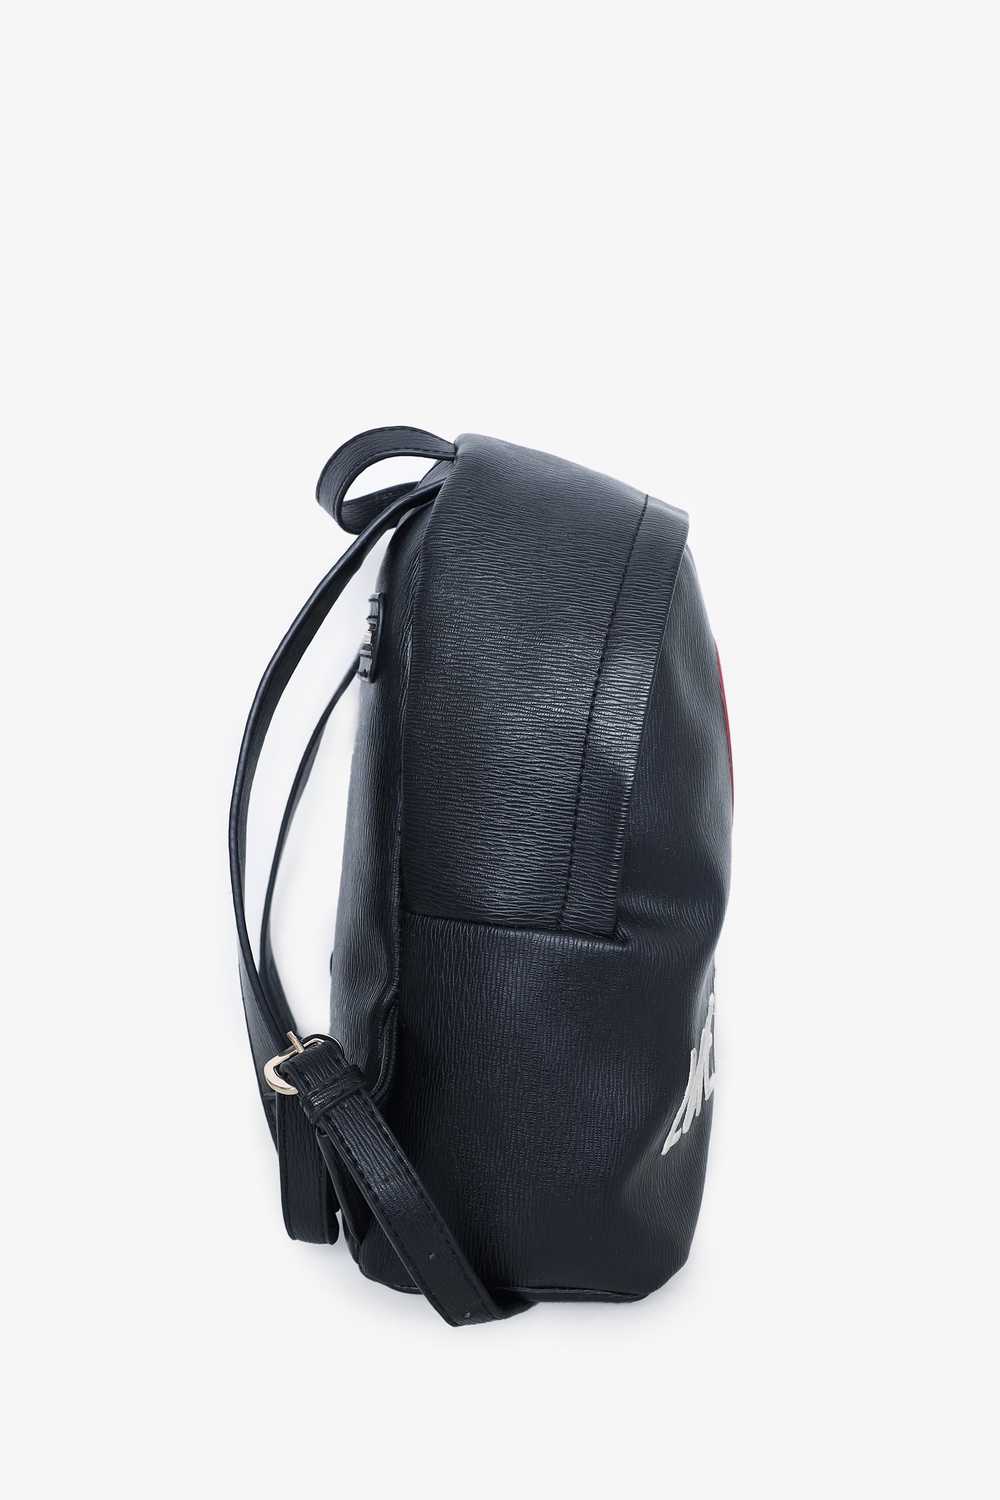 Love Moschino Black Leather Red Heart Backpack - image 4